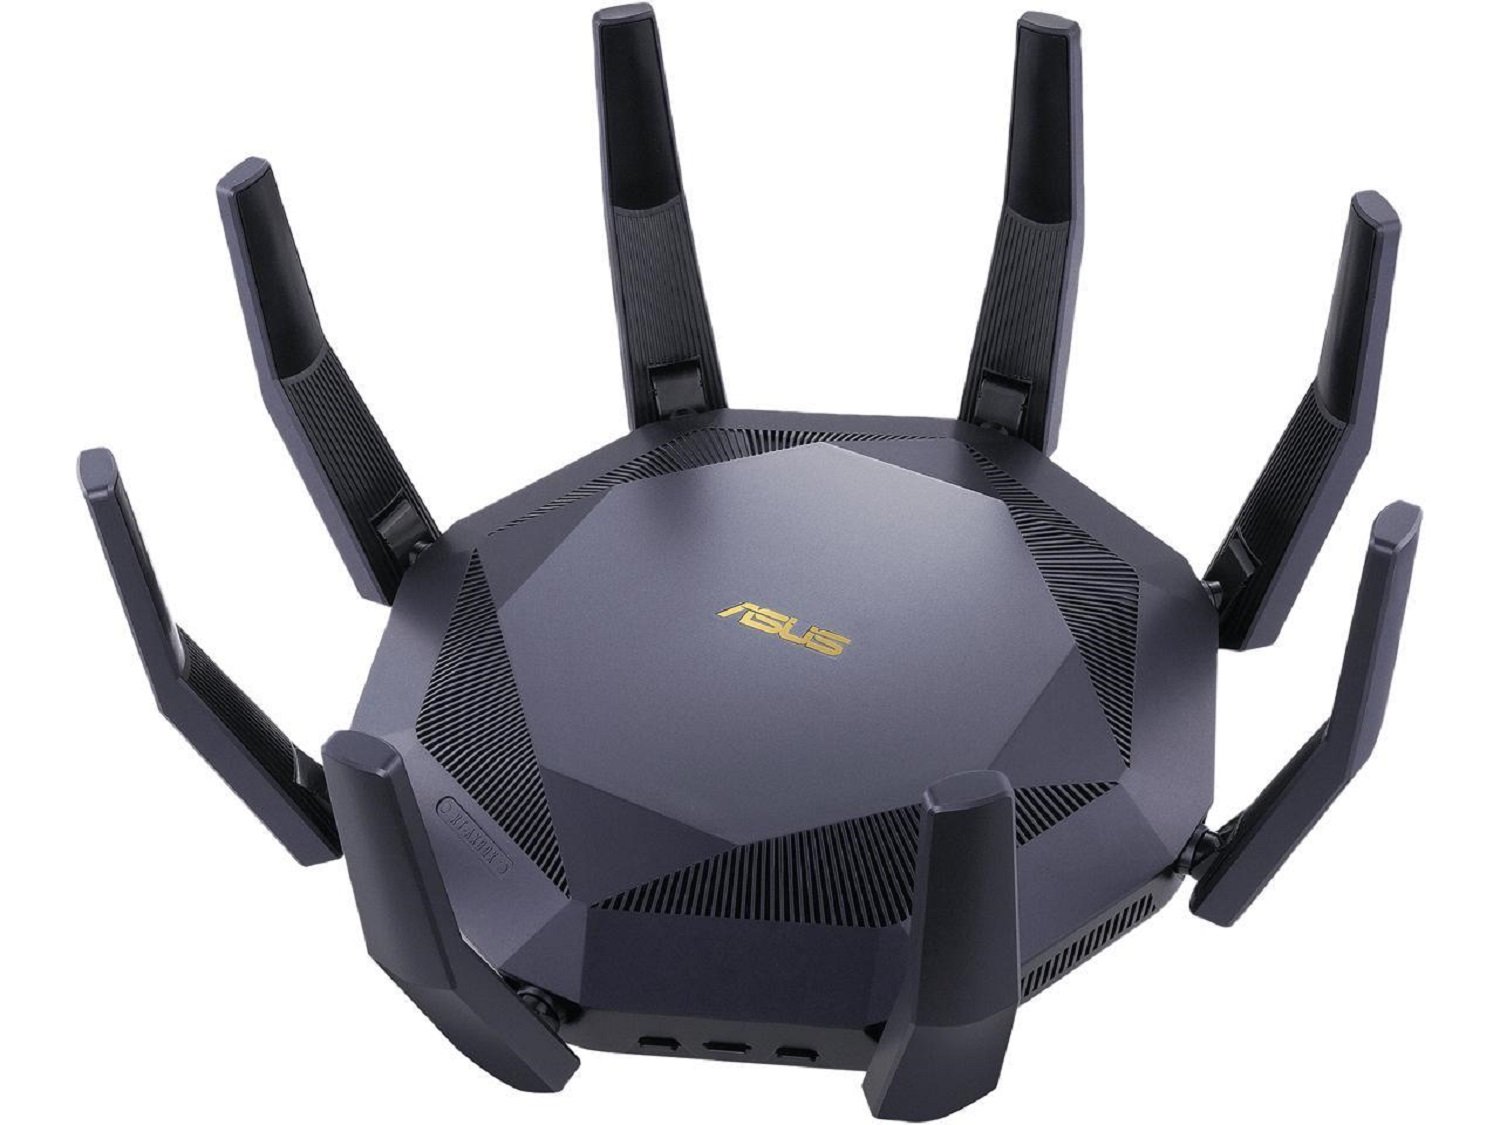 Wi-Fi 6E routers are here, and we're not ready for them - CNET